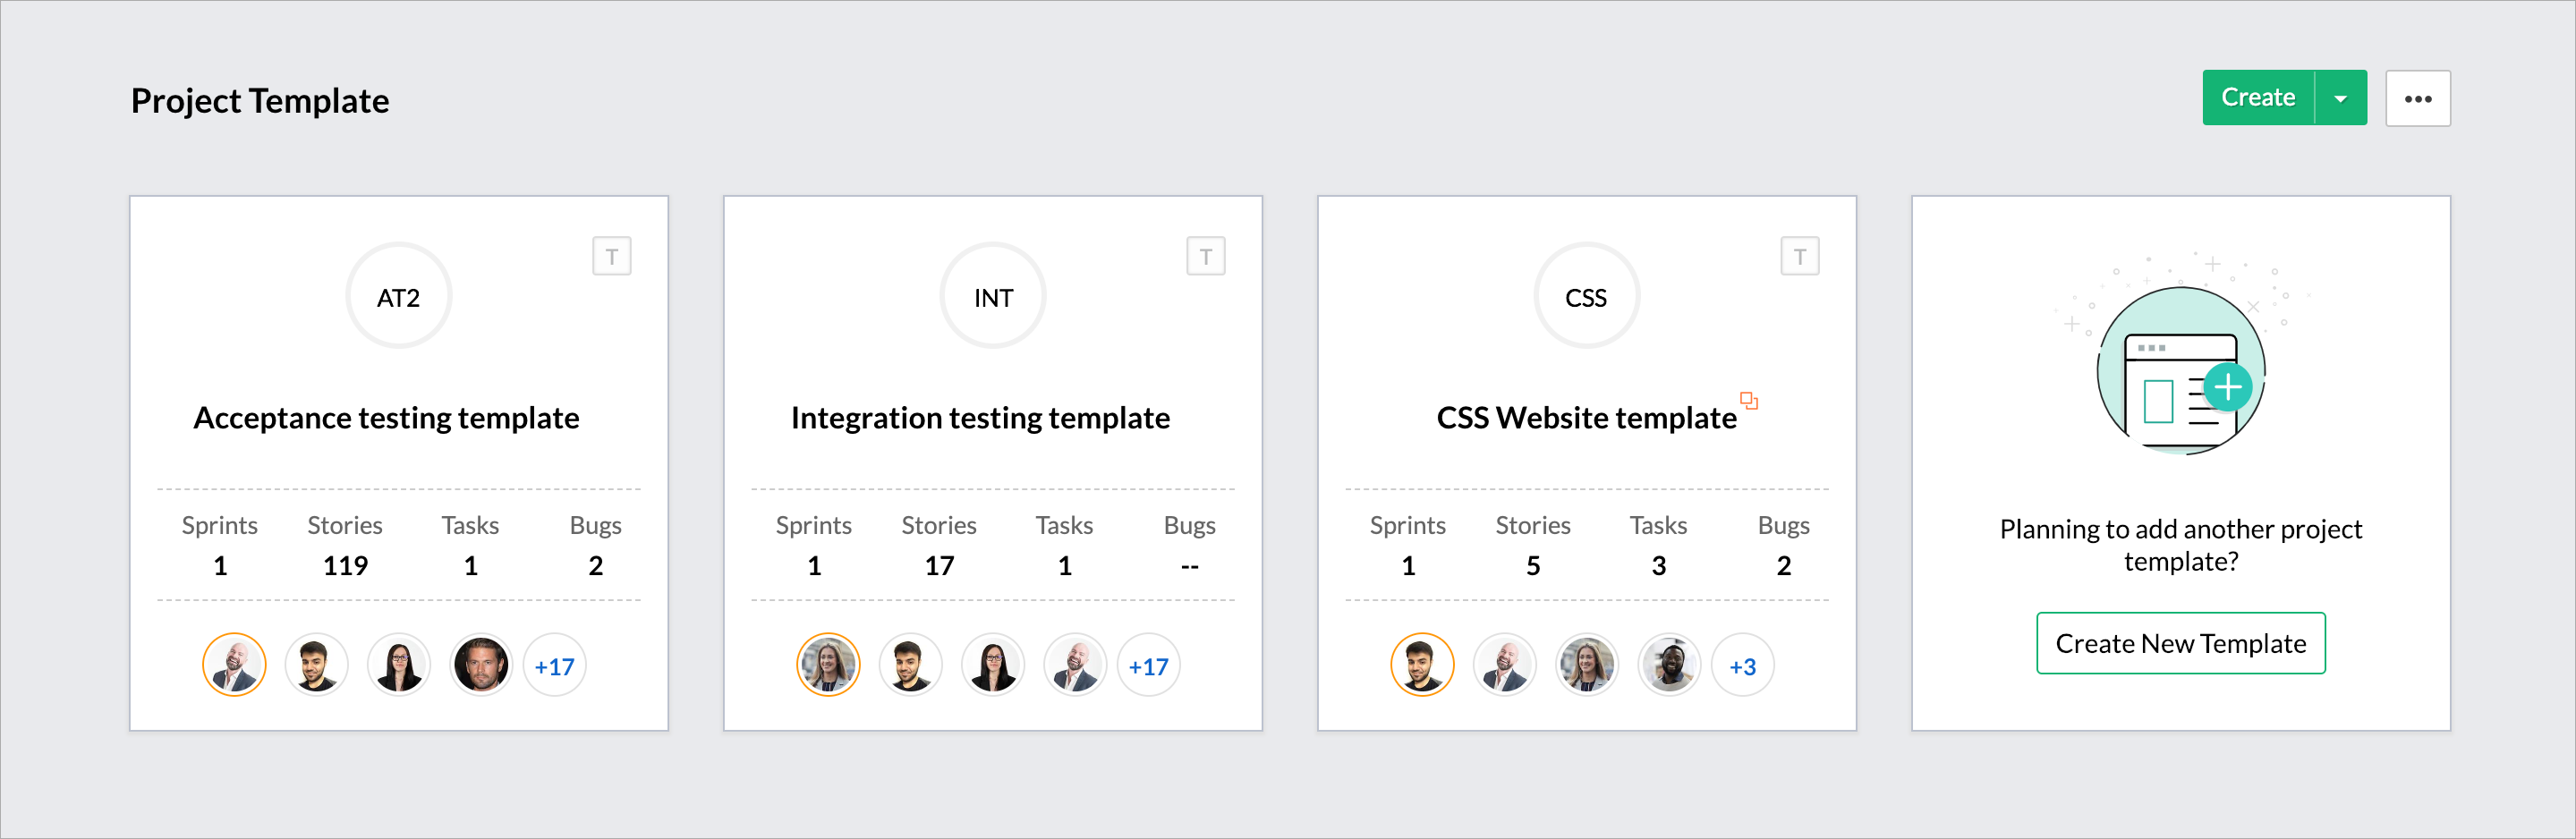 Project Templates in Zoho Sprints 